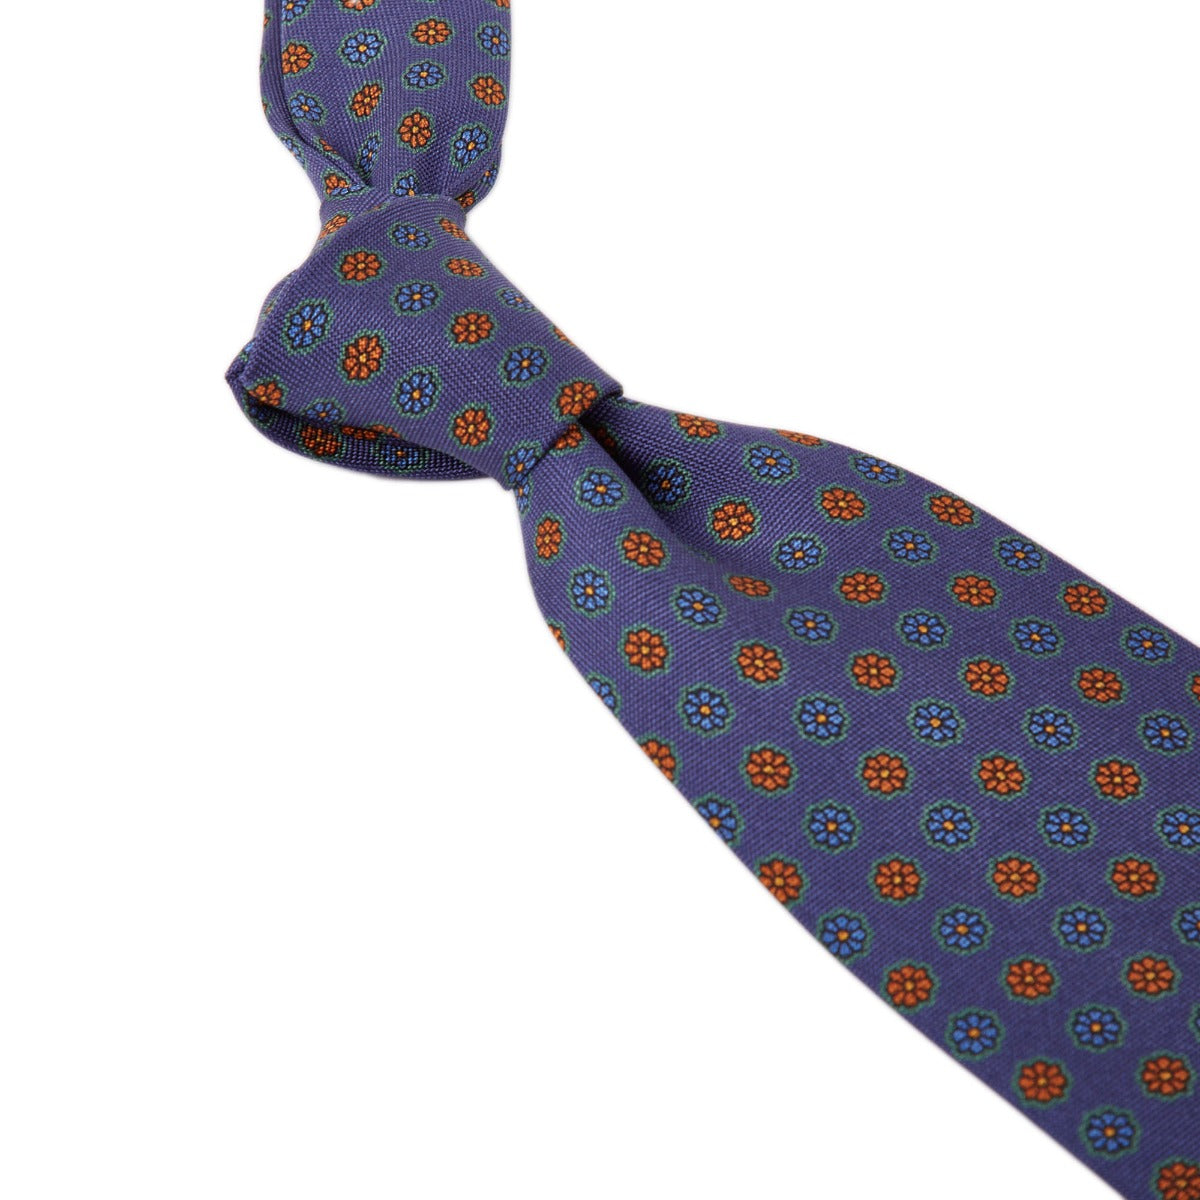 A Sovereign Grade Blue Medallion Jacquard Silk Tie by KirbyAllison.com with quality orange and blue polka dots.